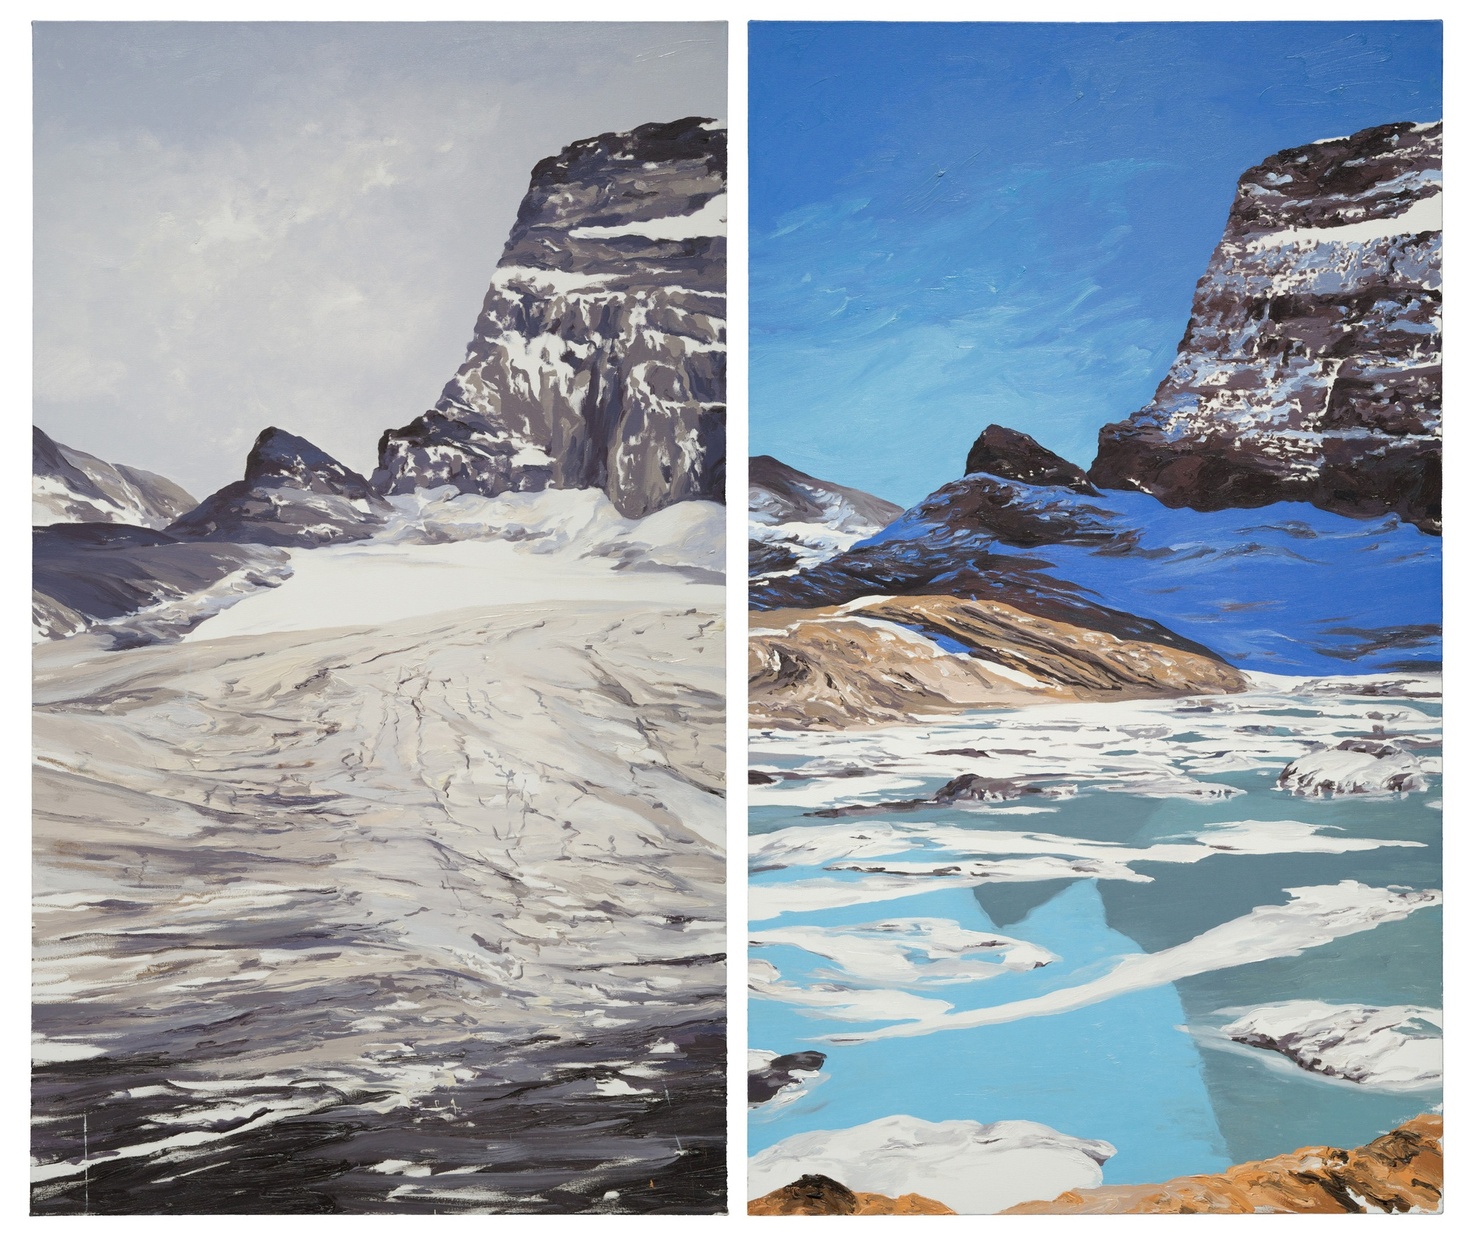 Two paintings side-by-side of the same mountain-scape, one painting depicts a snowy, gray, dull landscape while the other depicts a blue, spring landscape.